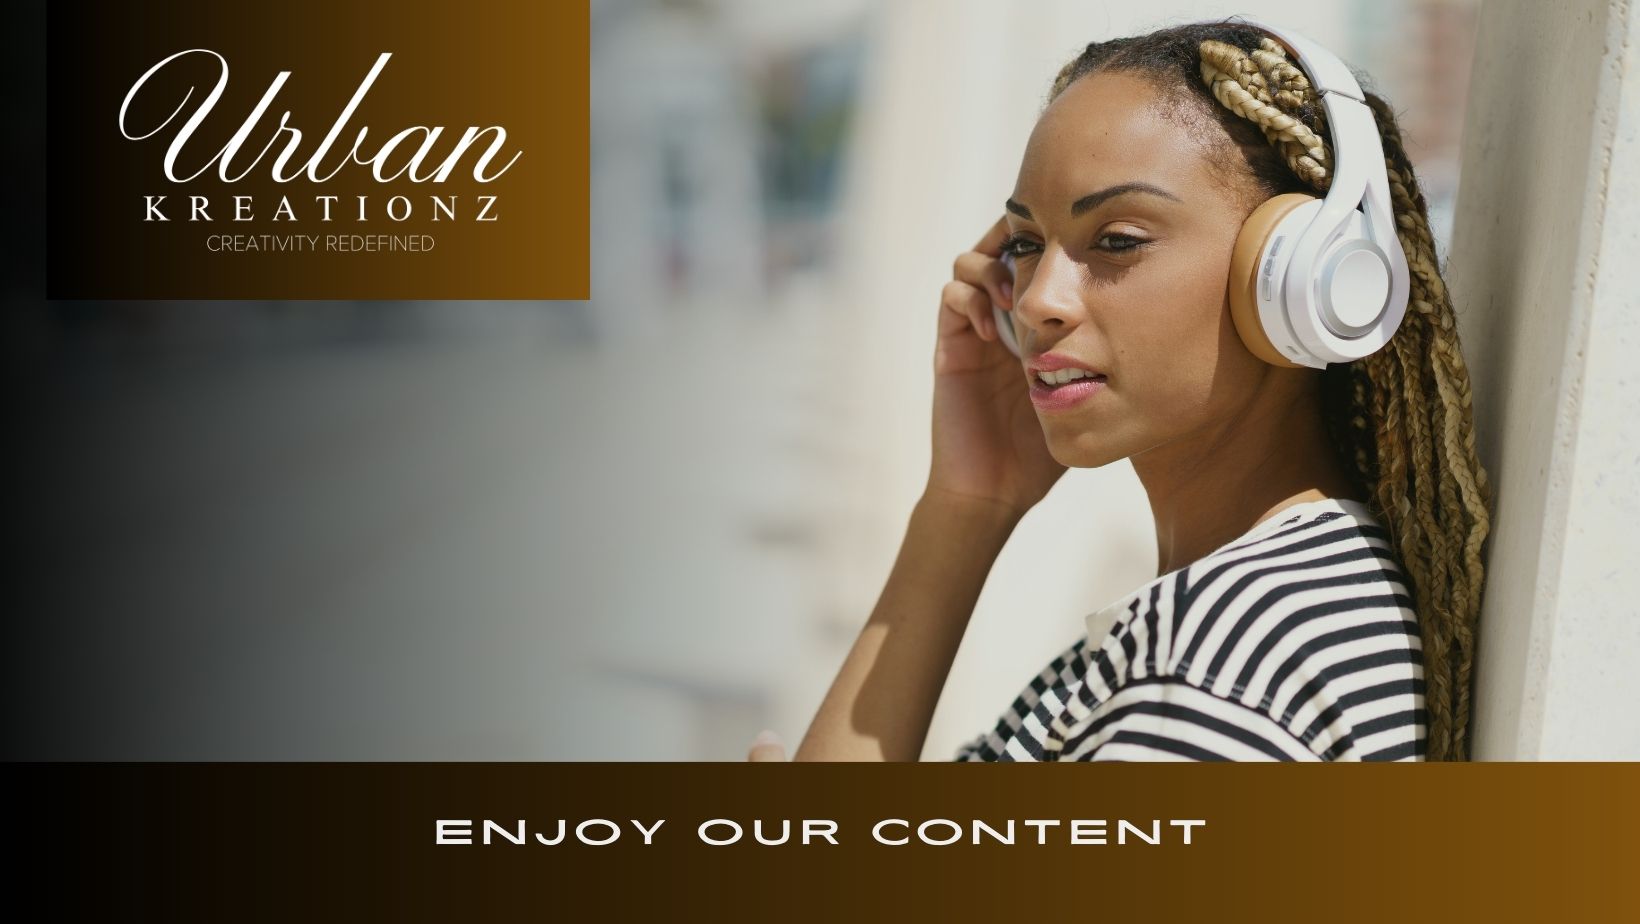 Enjoy our content at Urban Kreationz